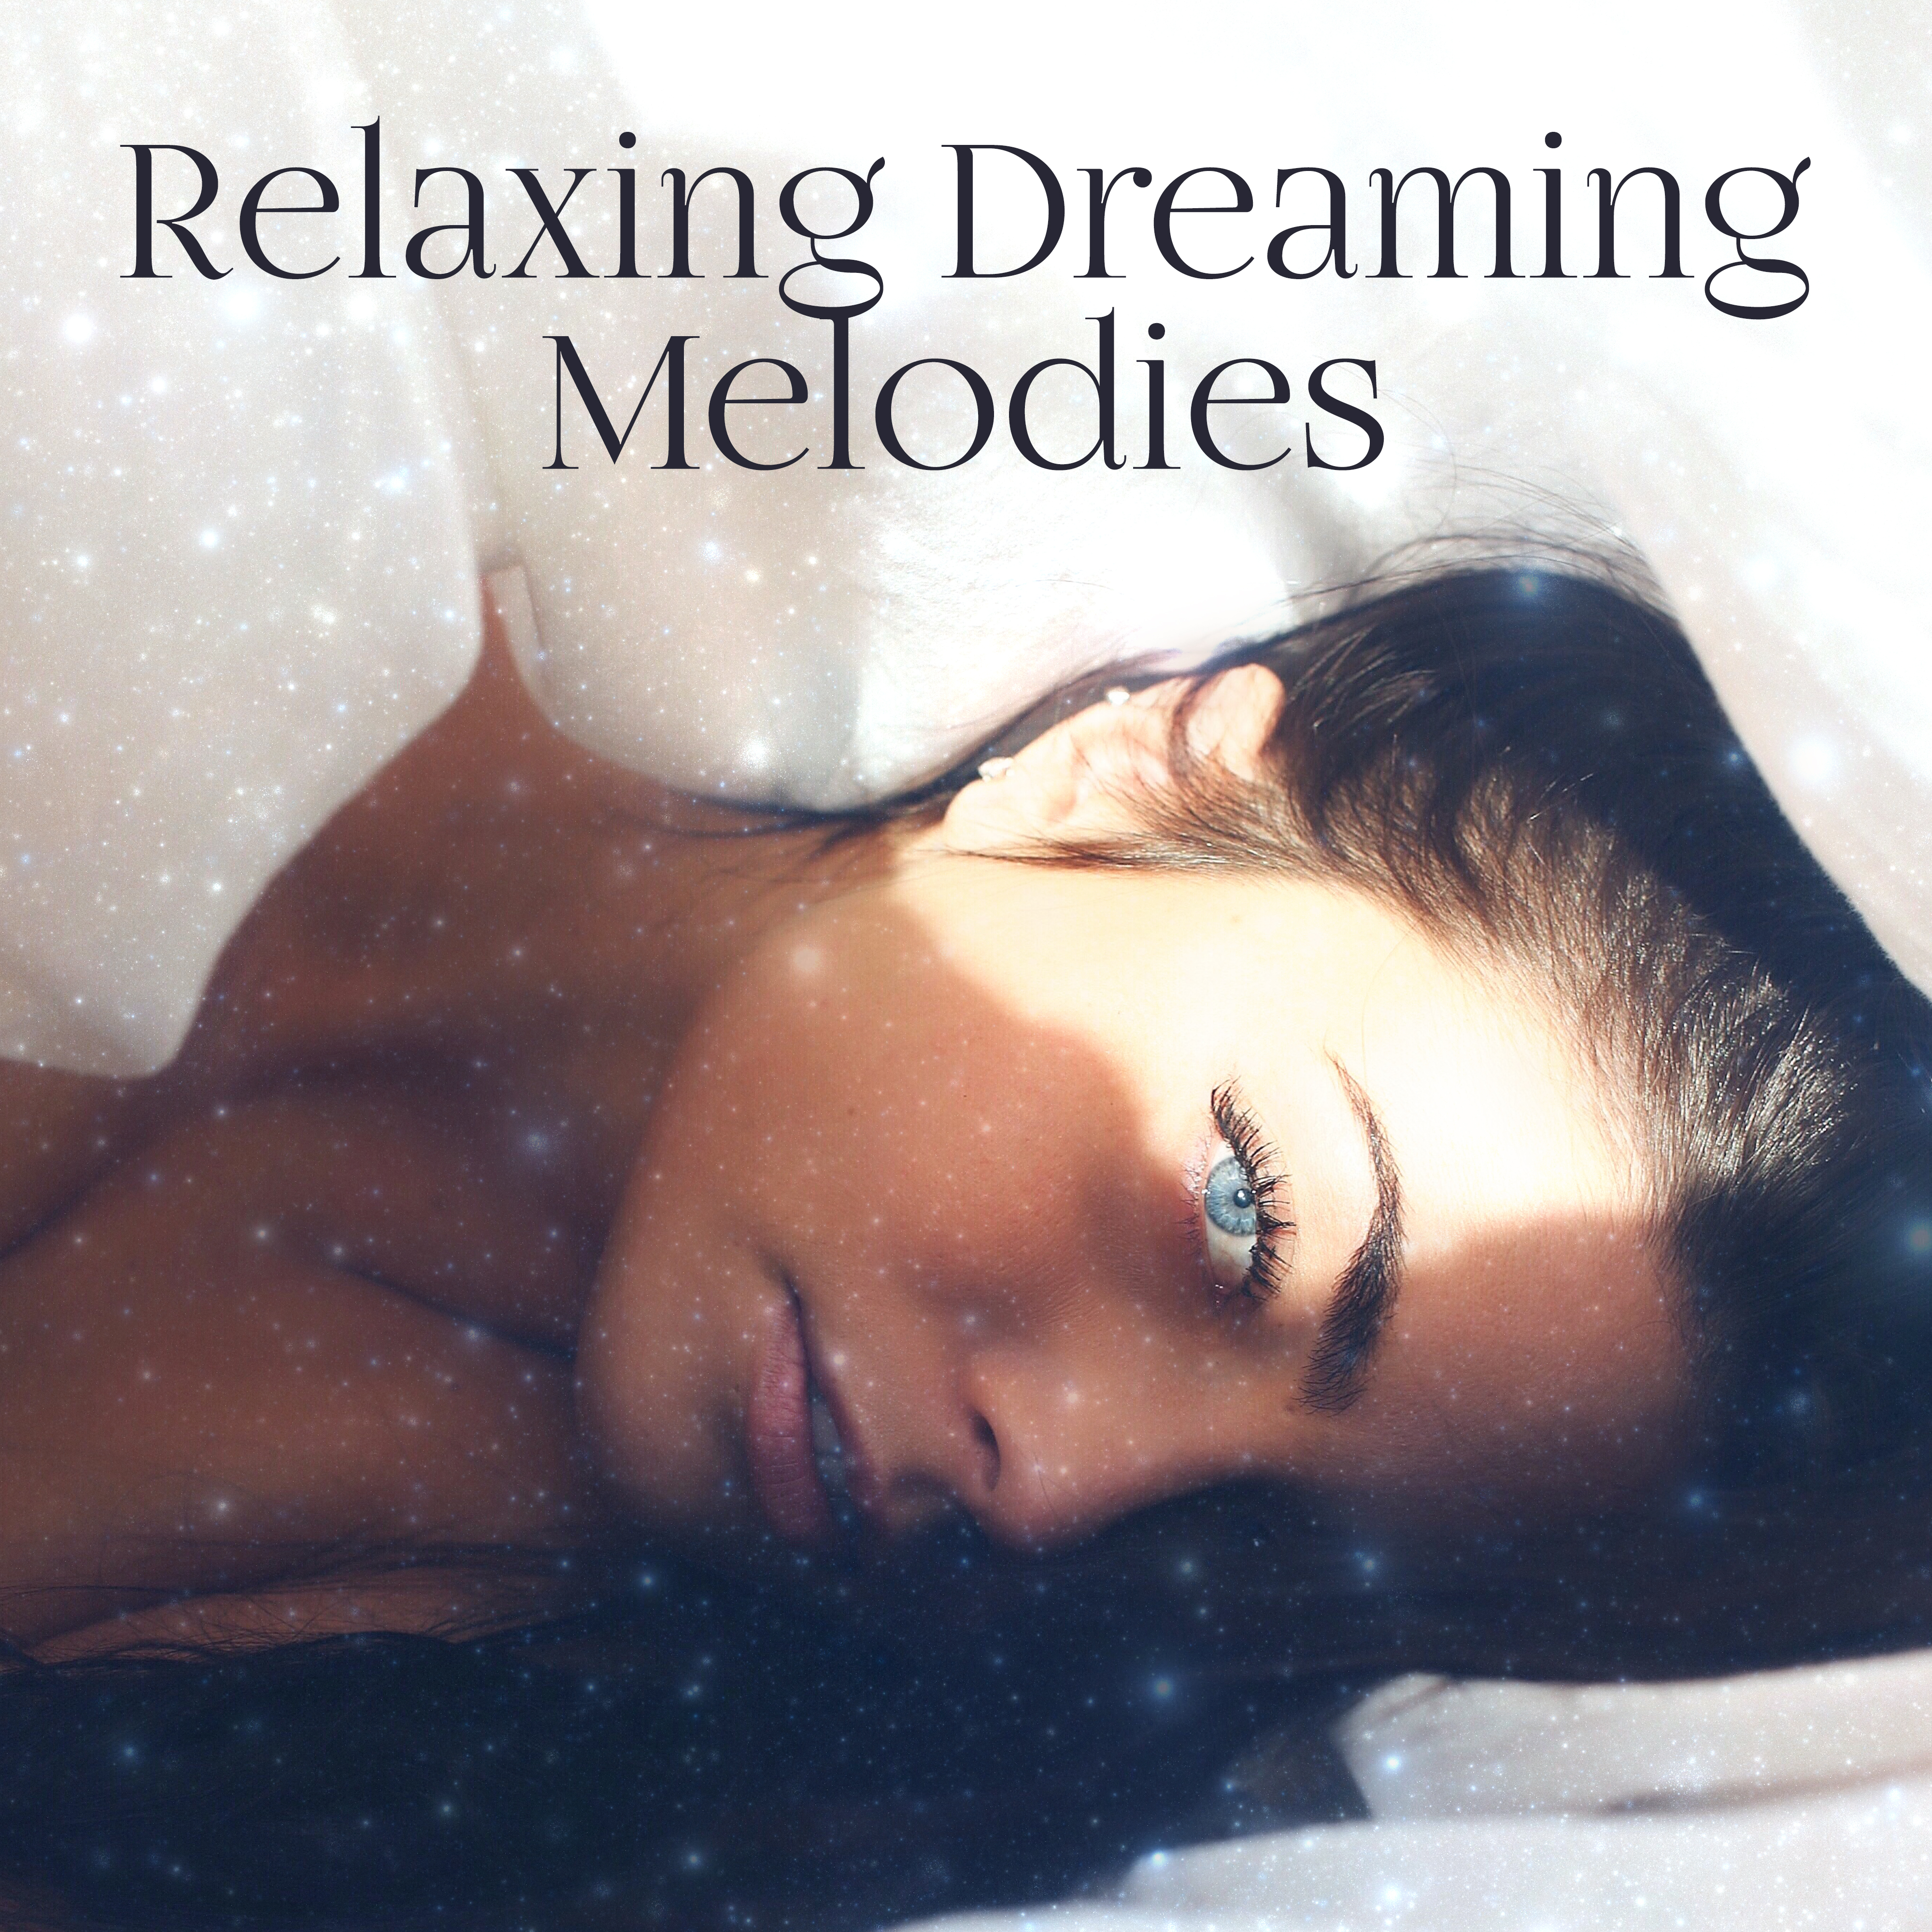 Relaxing Dreaming Melodies